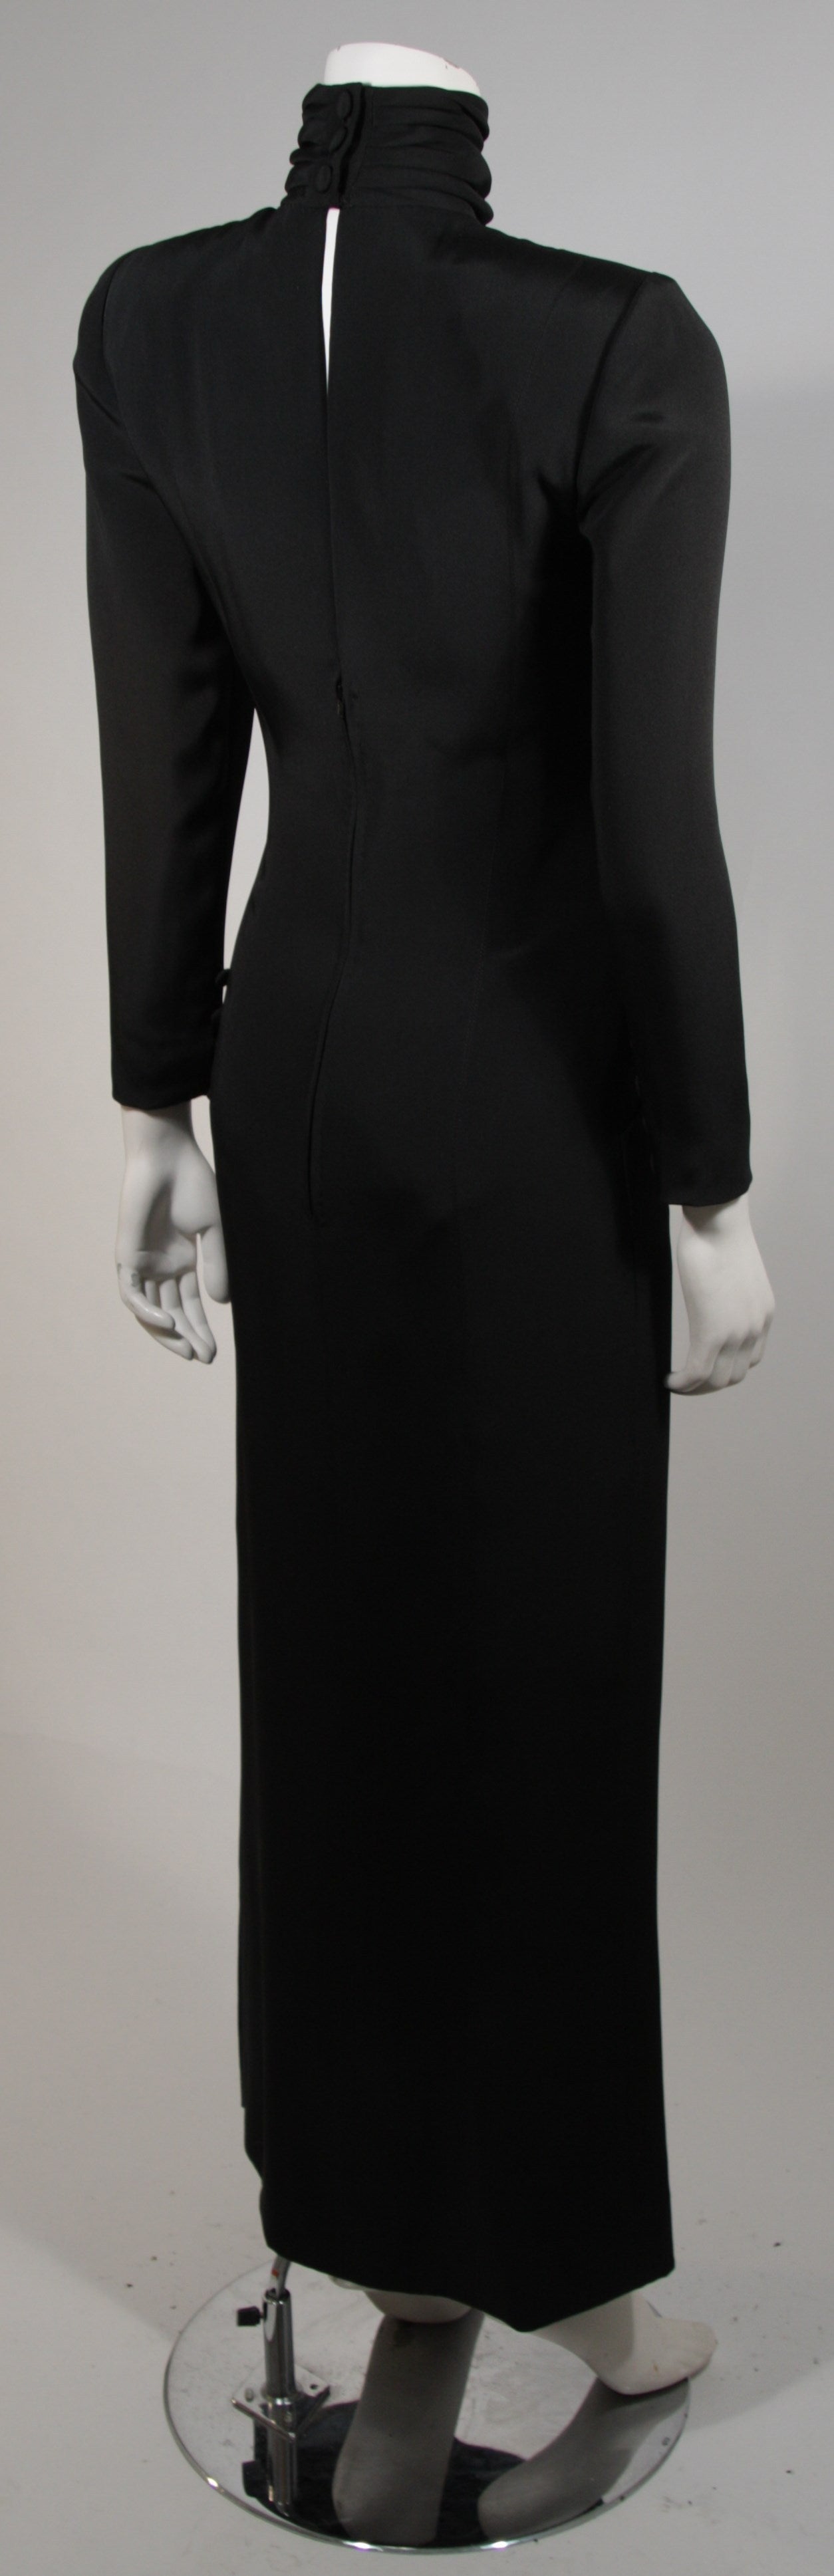 Chanel Haute Couture Black Silk Military Inspired Long Sleeve Gown Size 2-4 2